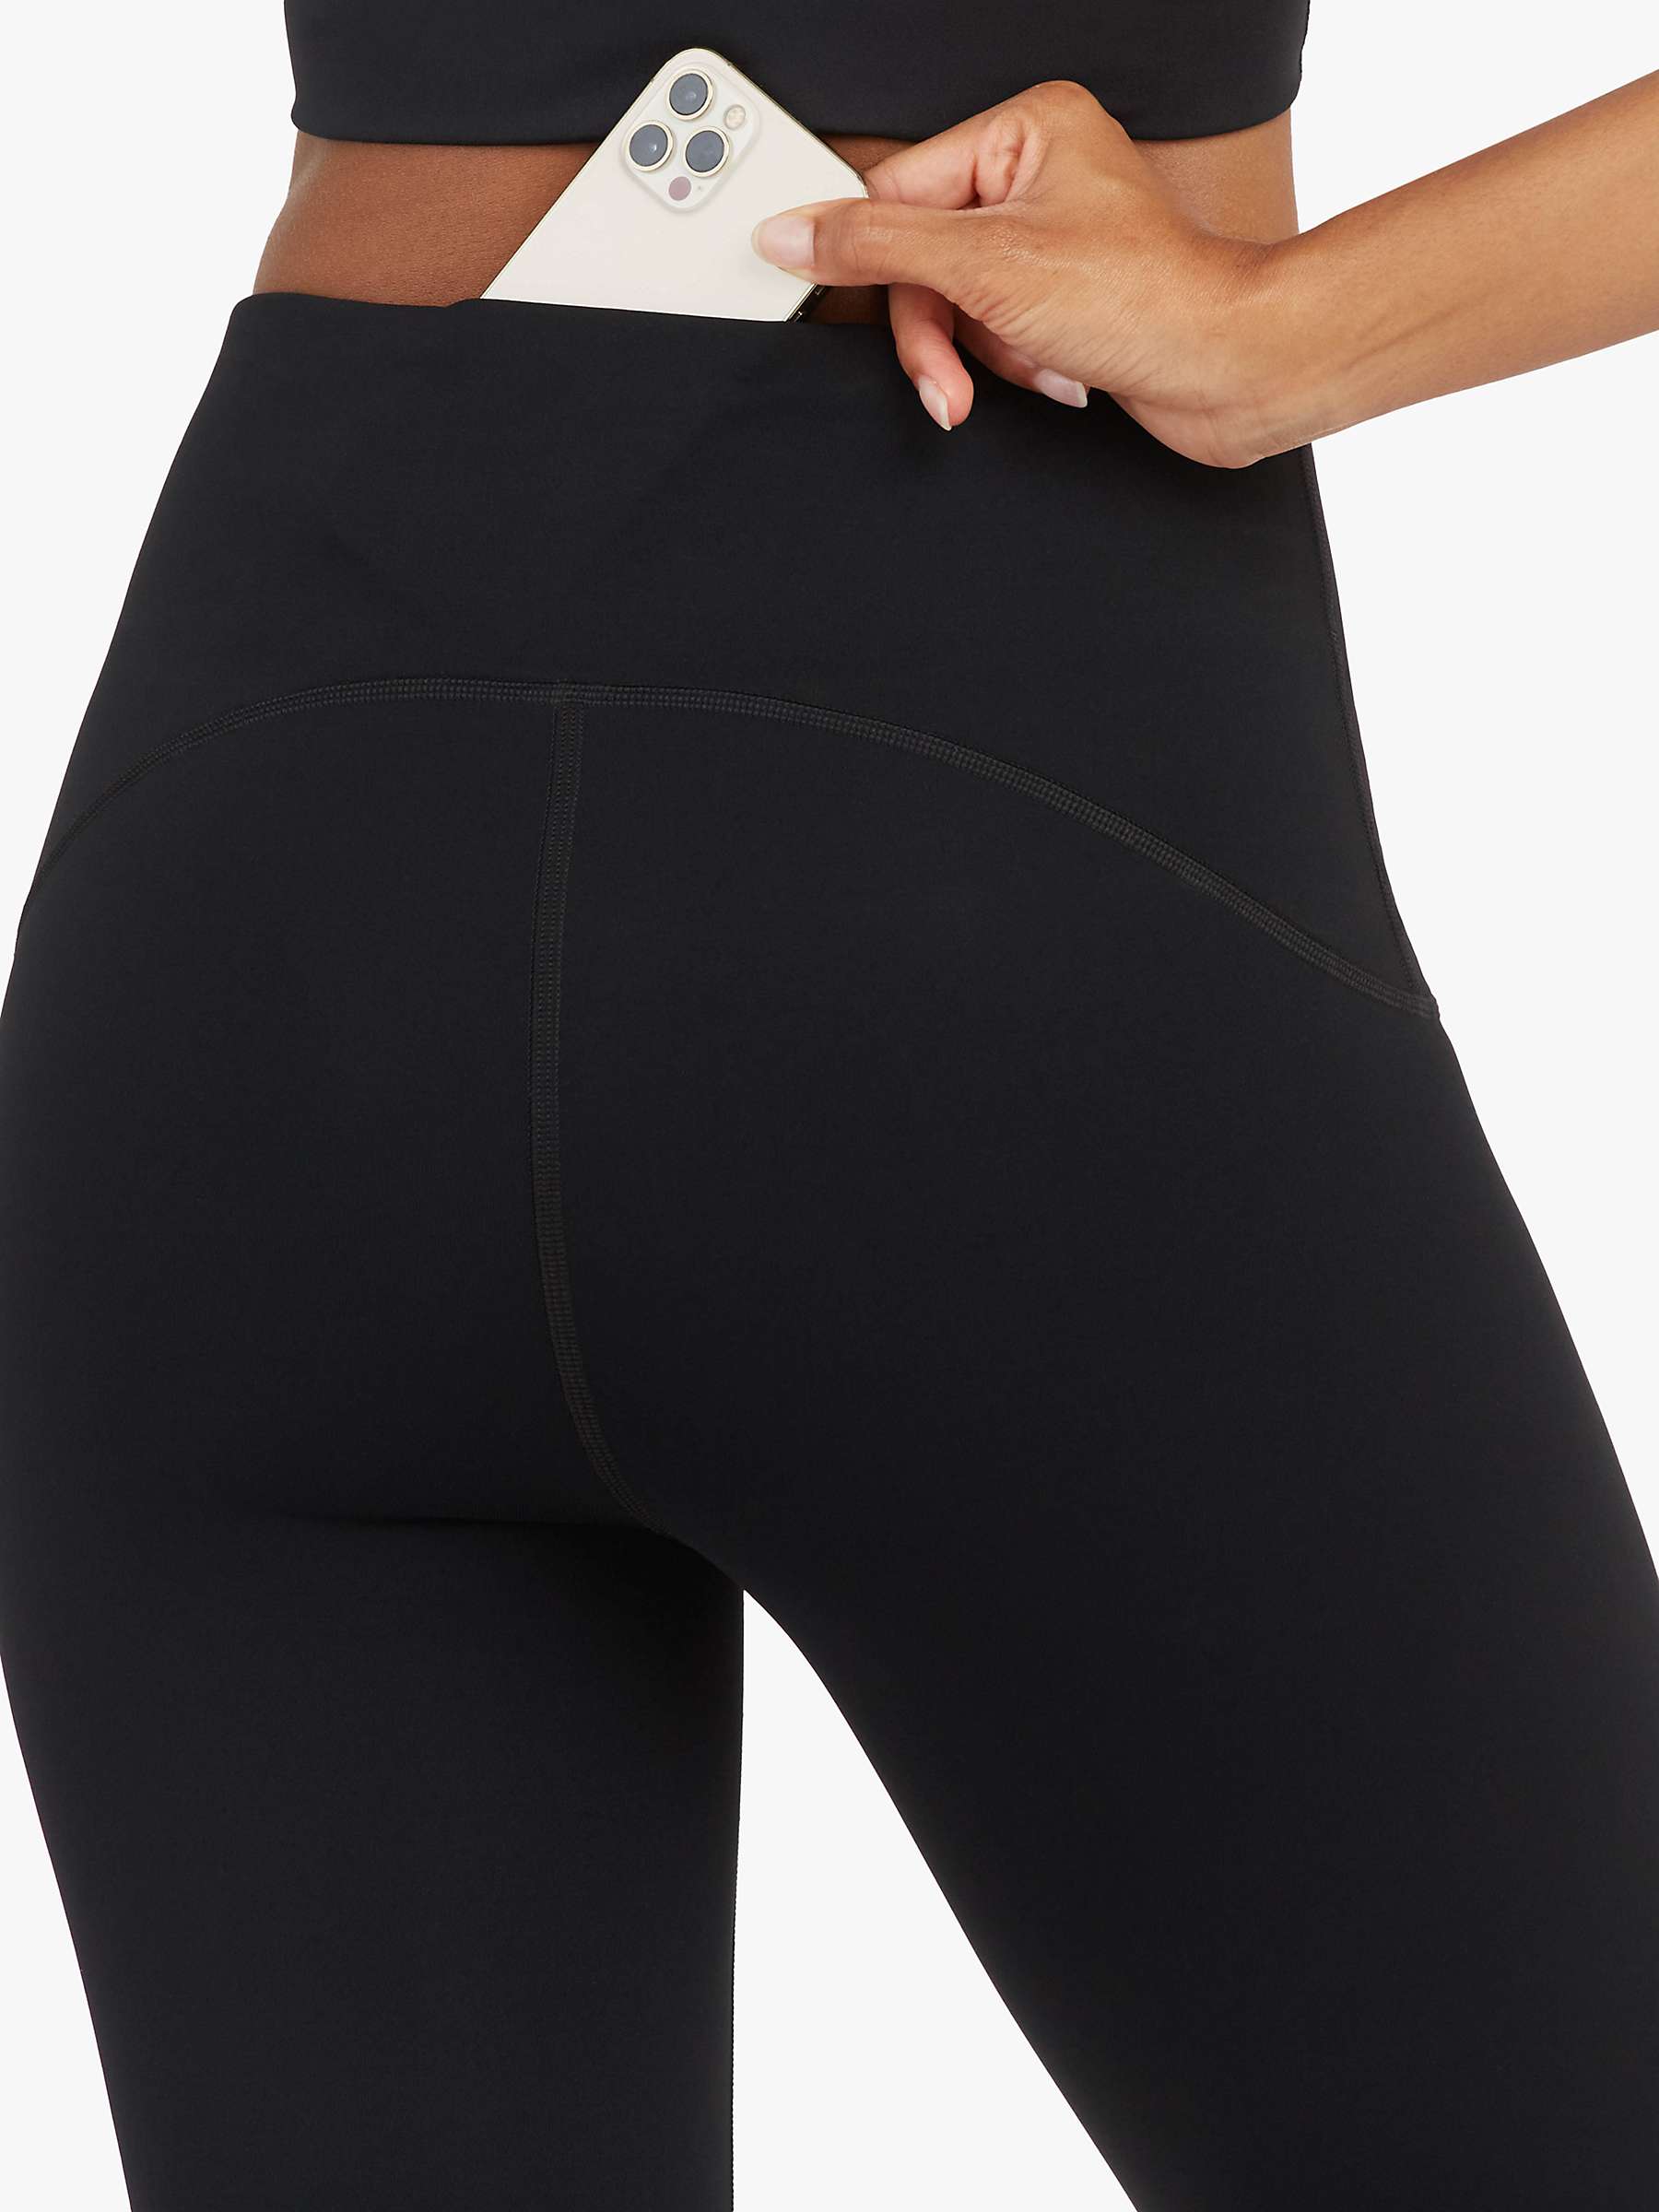 Buy Spanx Booty Boost Active Leggings Online at johnlewis.com